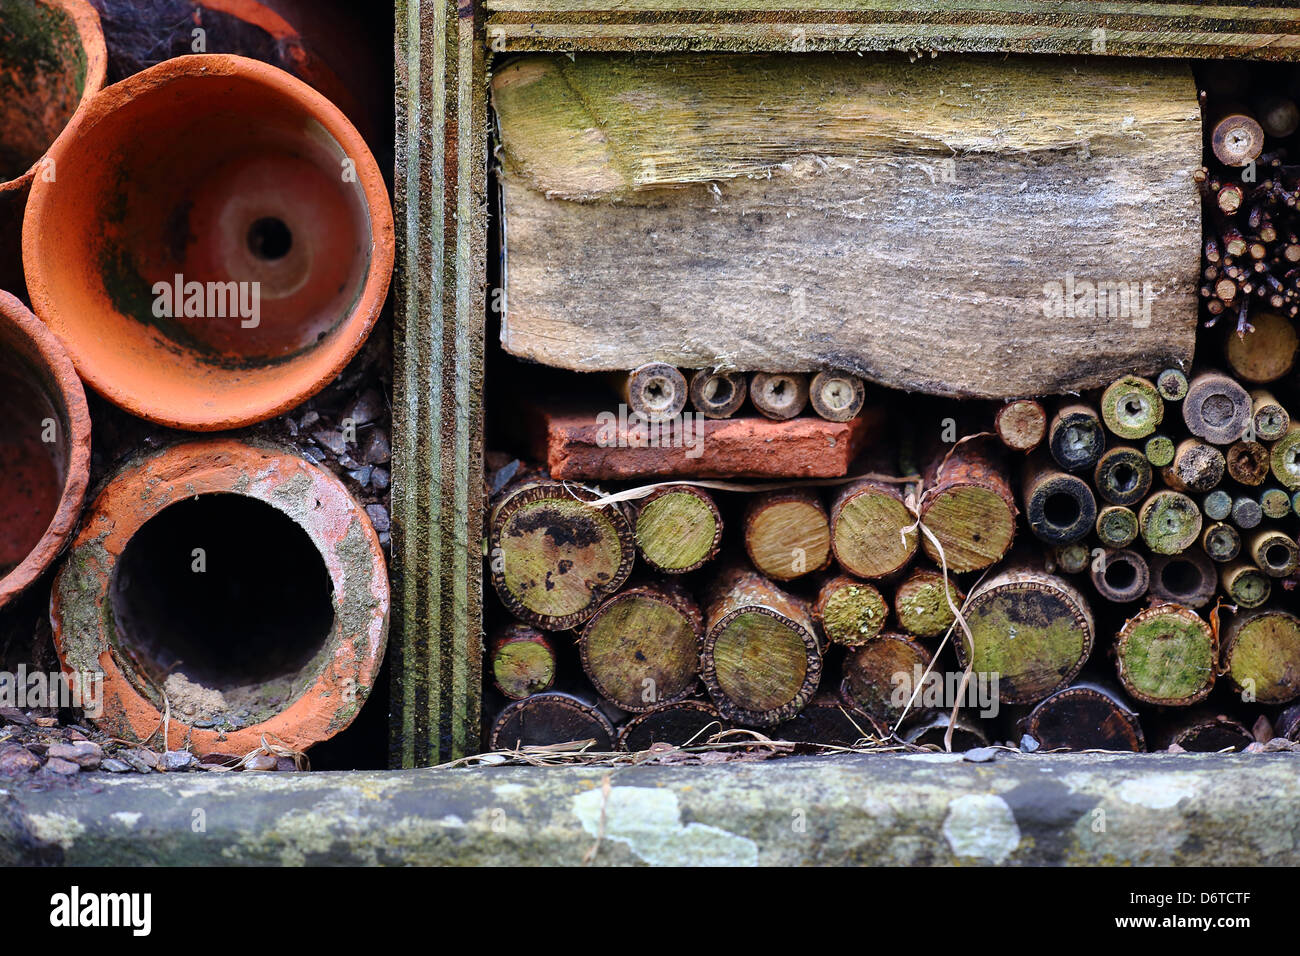 Bug box, home for insects, England Stock Photo